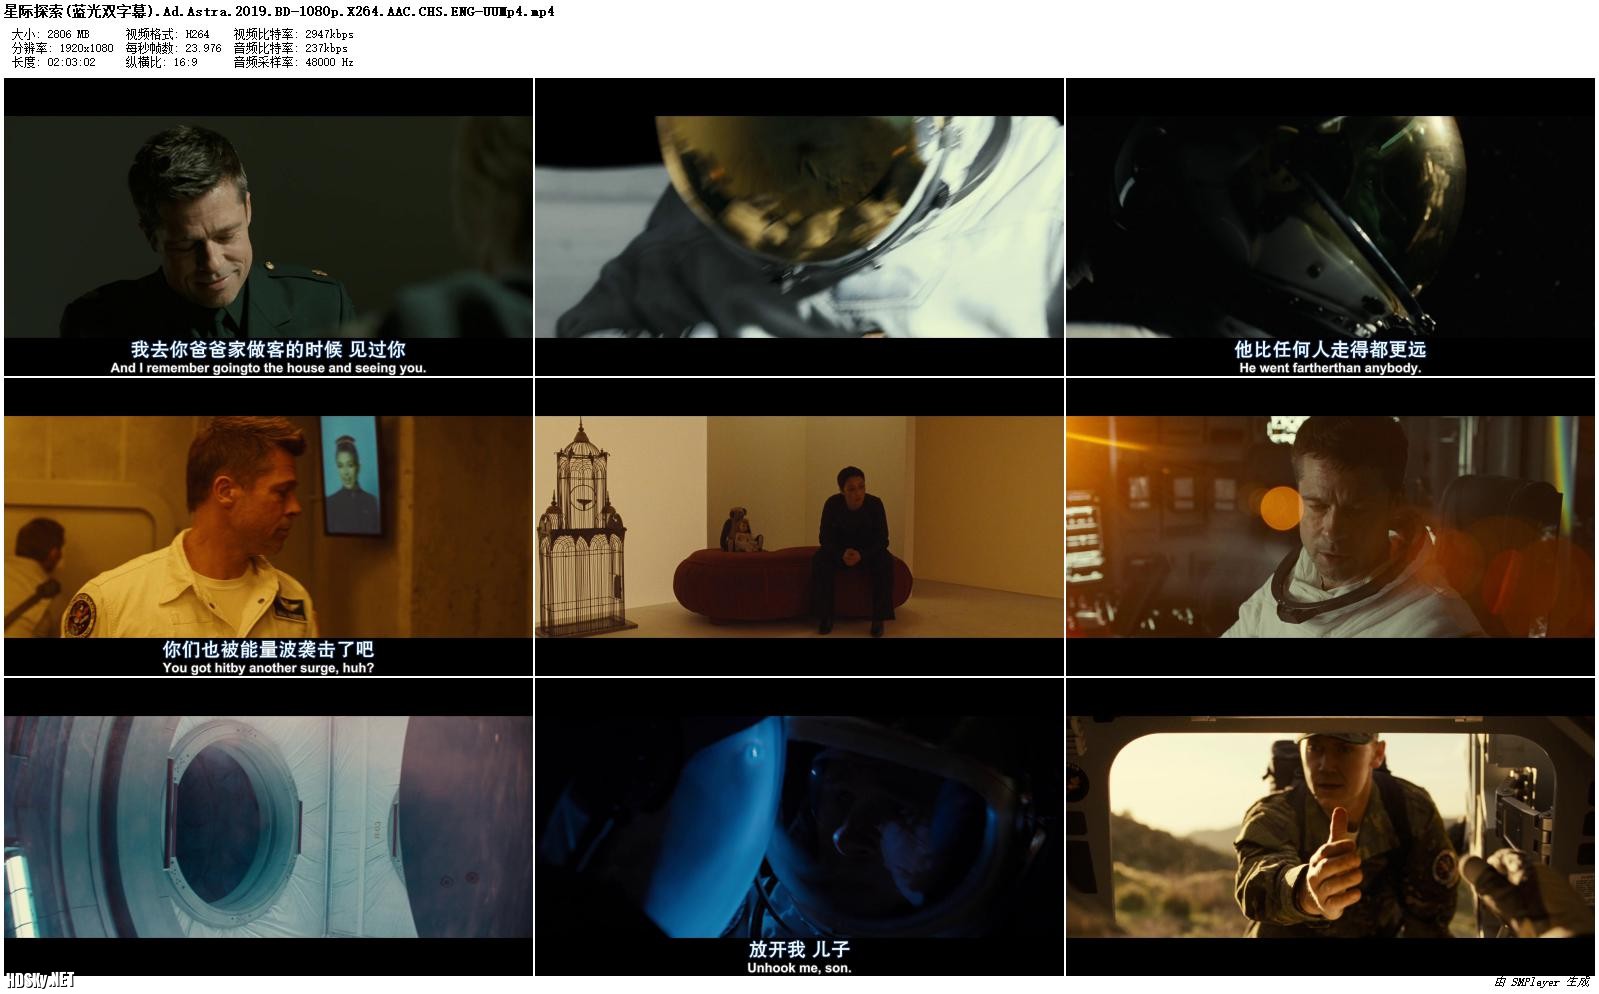 Ad.Astra.2019.BD-1080p.X264.AAC.CHS.ENG-UUMp4_preview.jpg